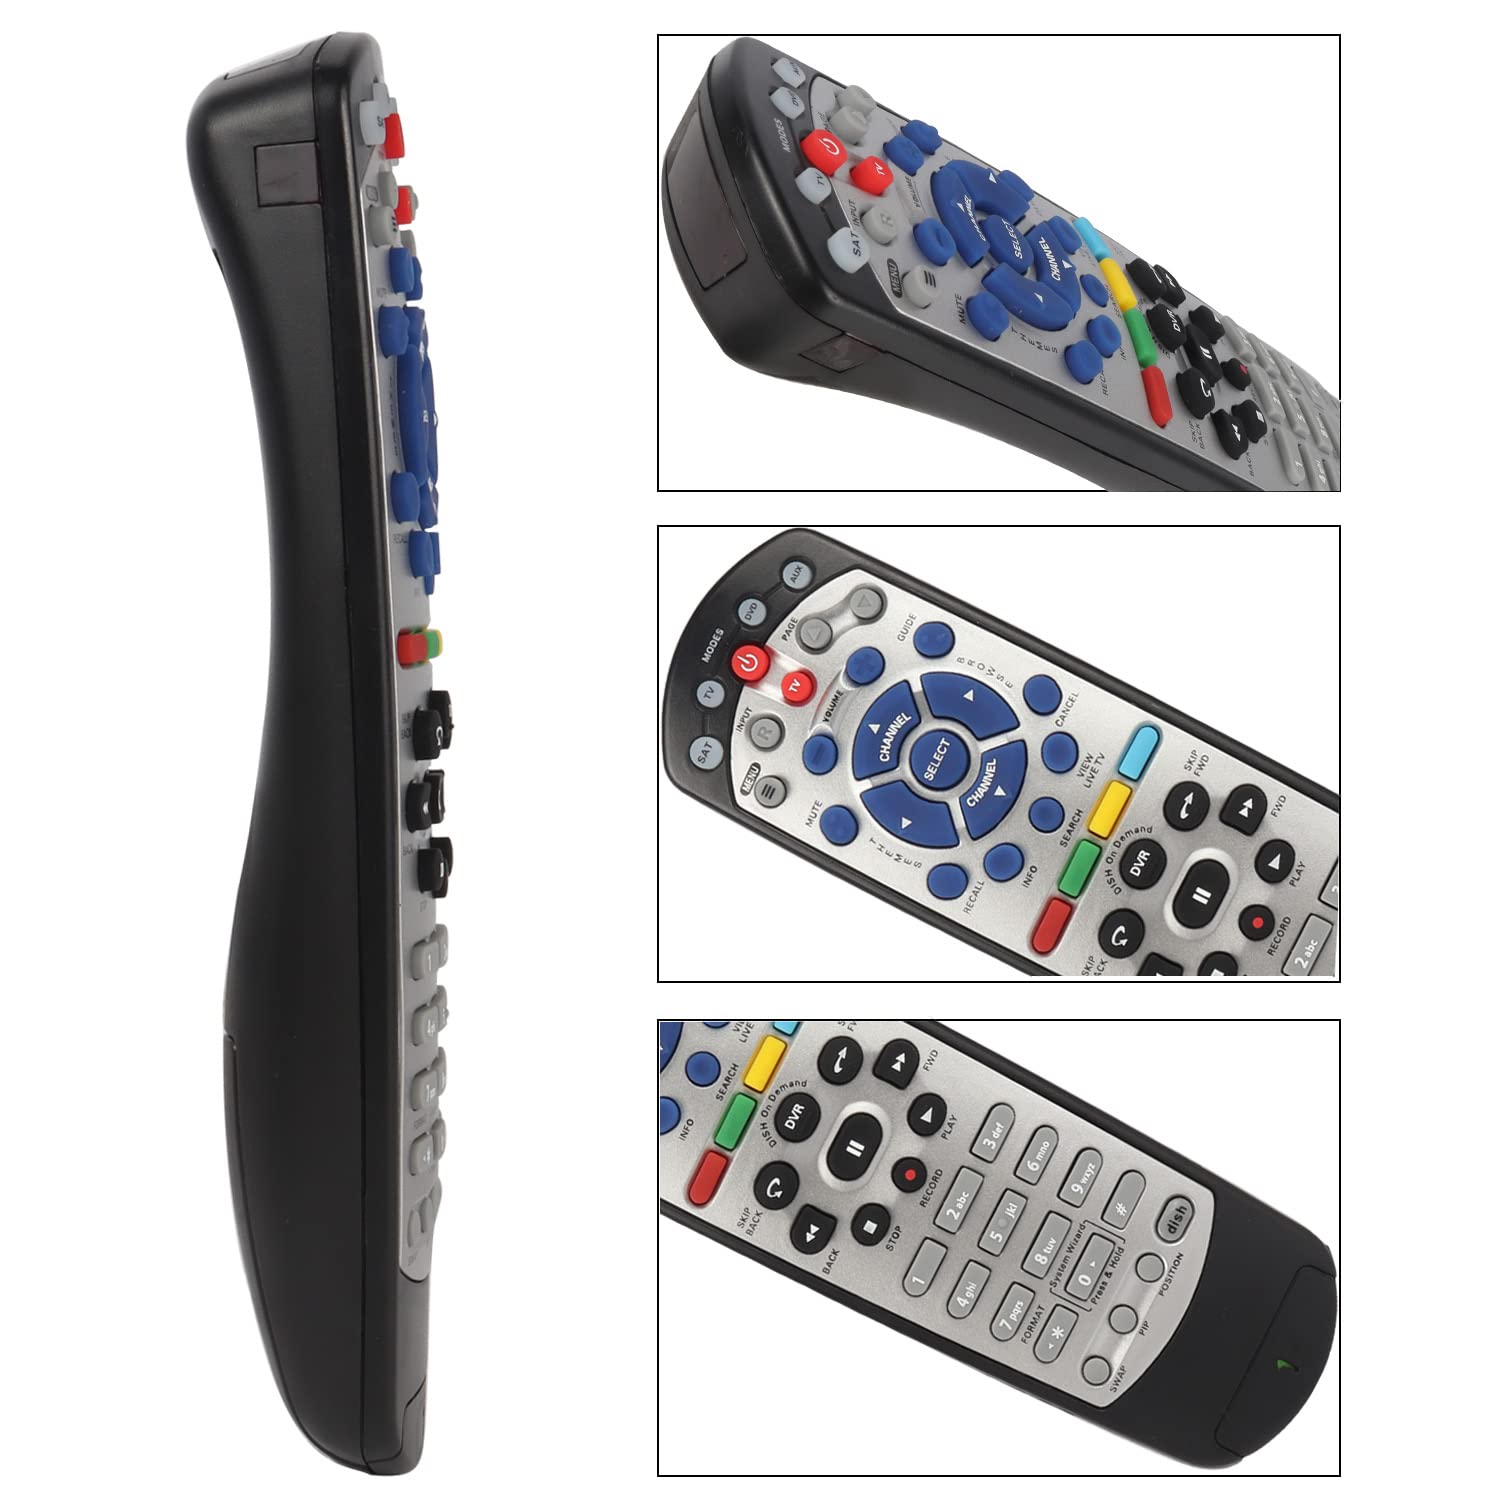 thinkstar New Ir Remote Control For Dish Network 20.1 Tv1 Satellite Receiver With Learning Code Function For Tv Dvd Aux 3 Modes [Not Fo…